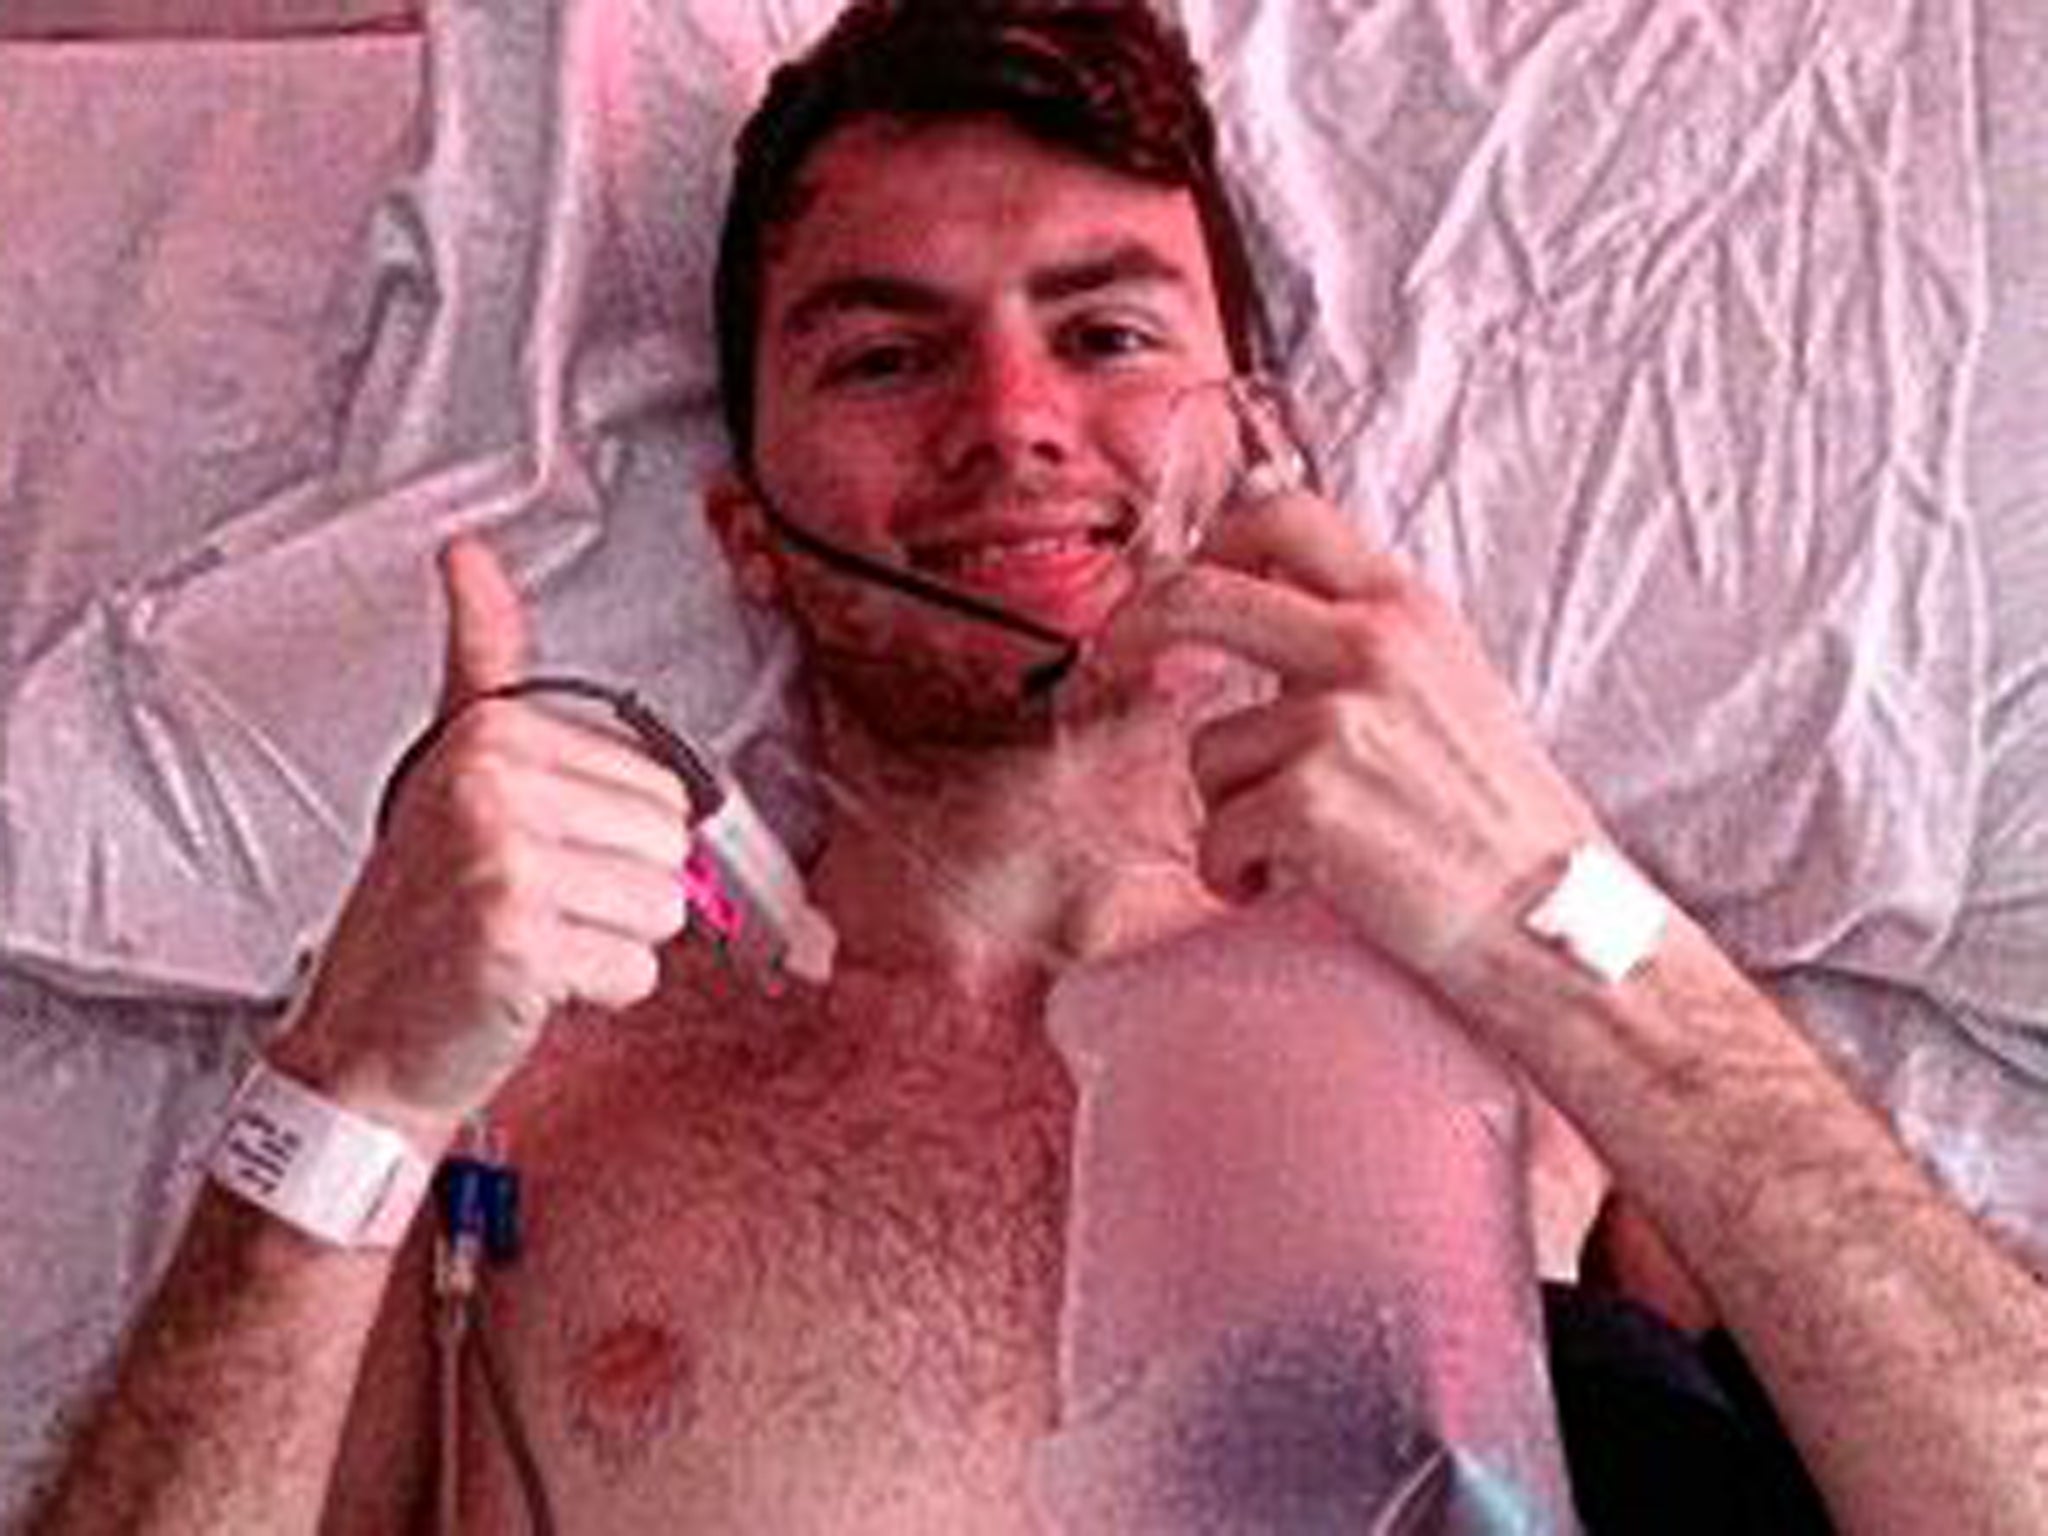 Stephen Sutton, who has raised over £3m through his battle with cancer